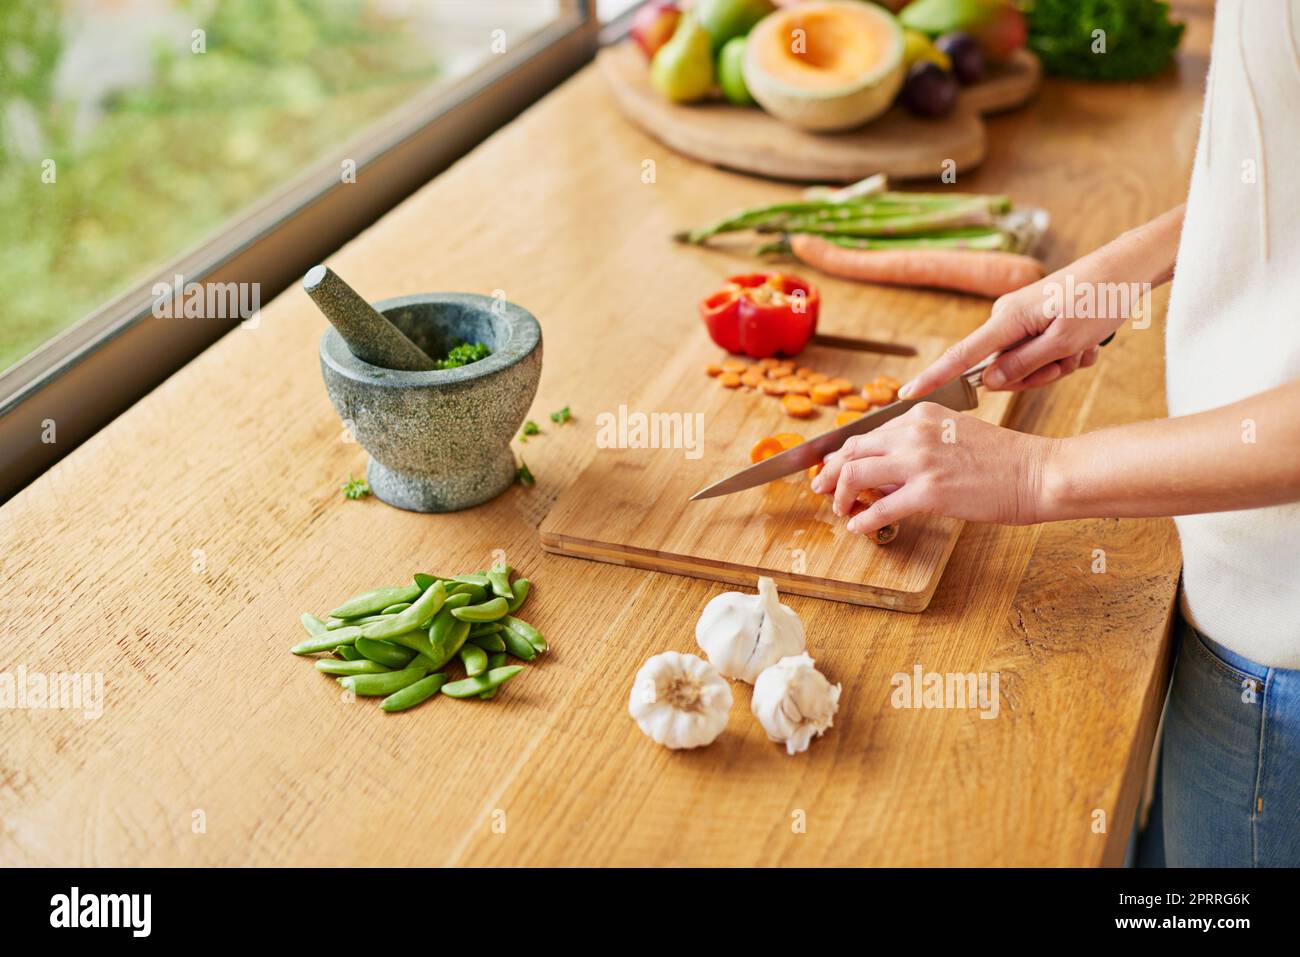 Close-up Of Woman's Hand Chopping Vegetables With Knife In Kitchen Stock  Photo, Picture and Royalty Free Image. Image 56706435.